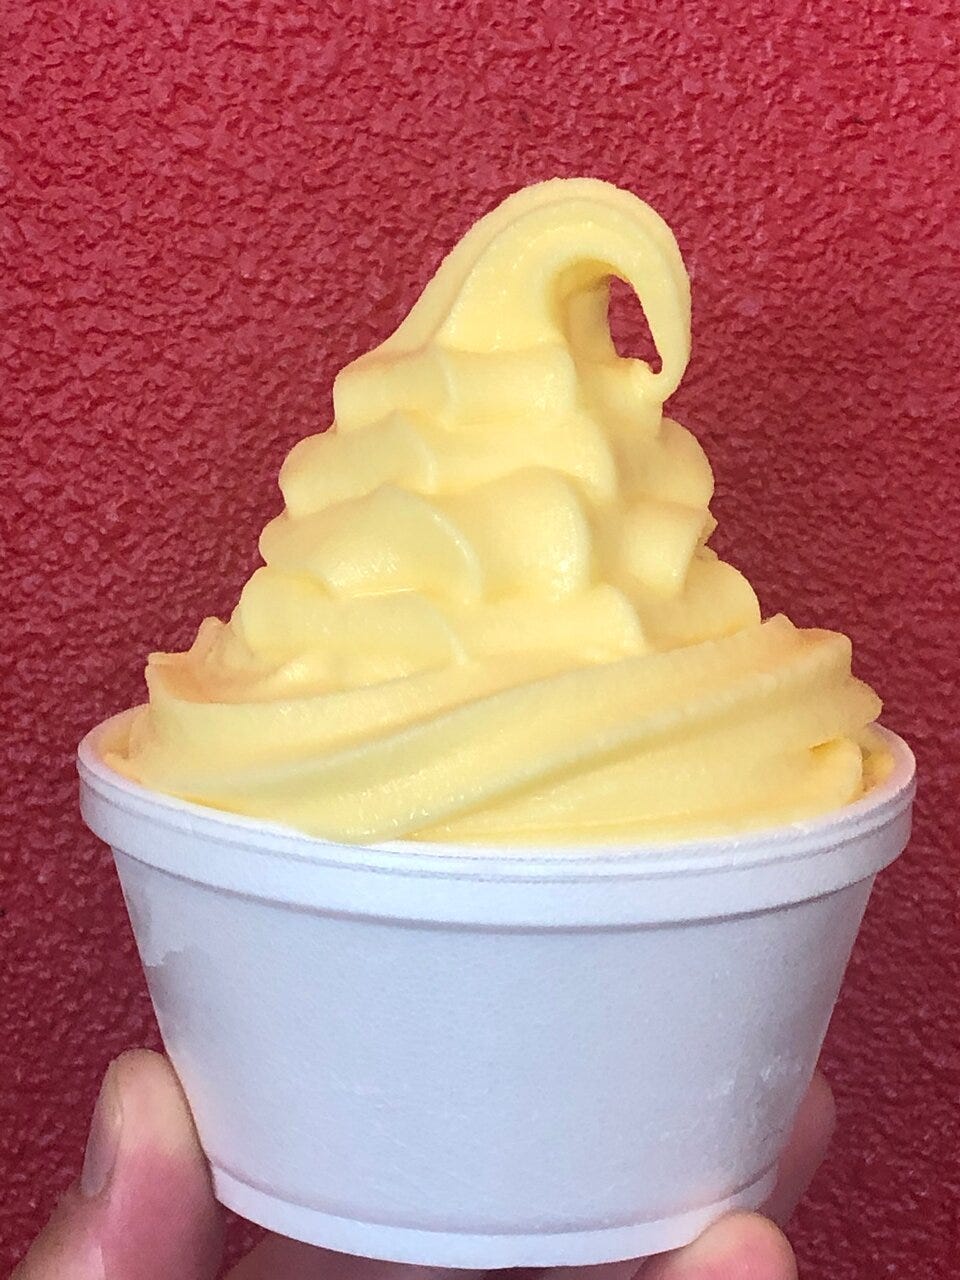 Dole whip pineapple always available and so refreshing! A dairy free  option! - Picture of Rich Farm Ice Cream ca, Placentia - Tripadvisor